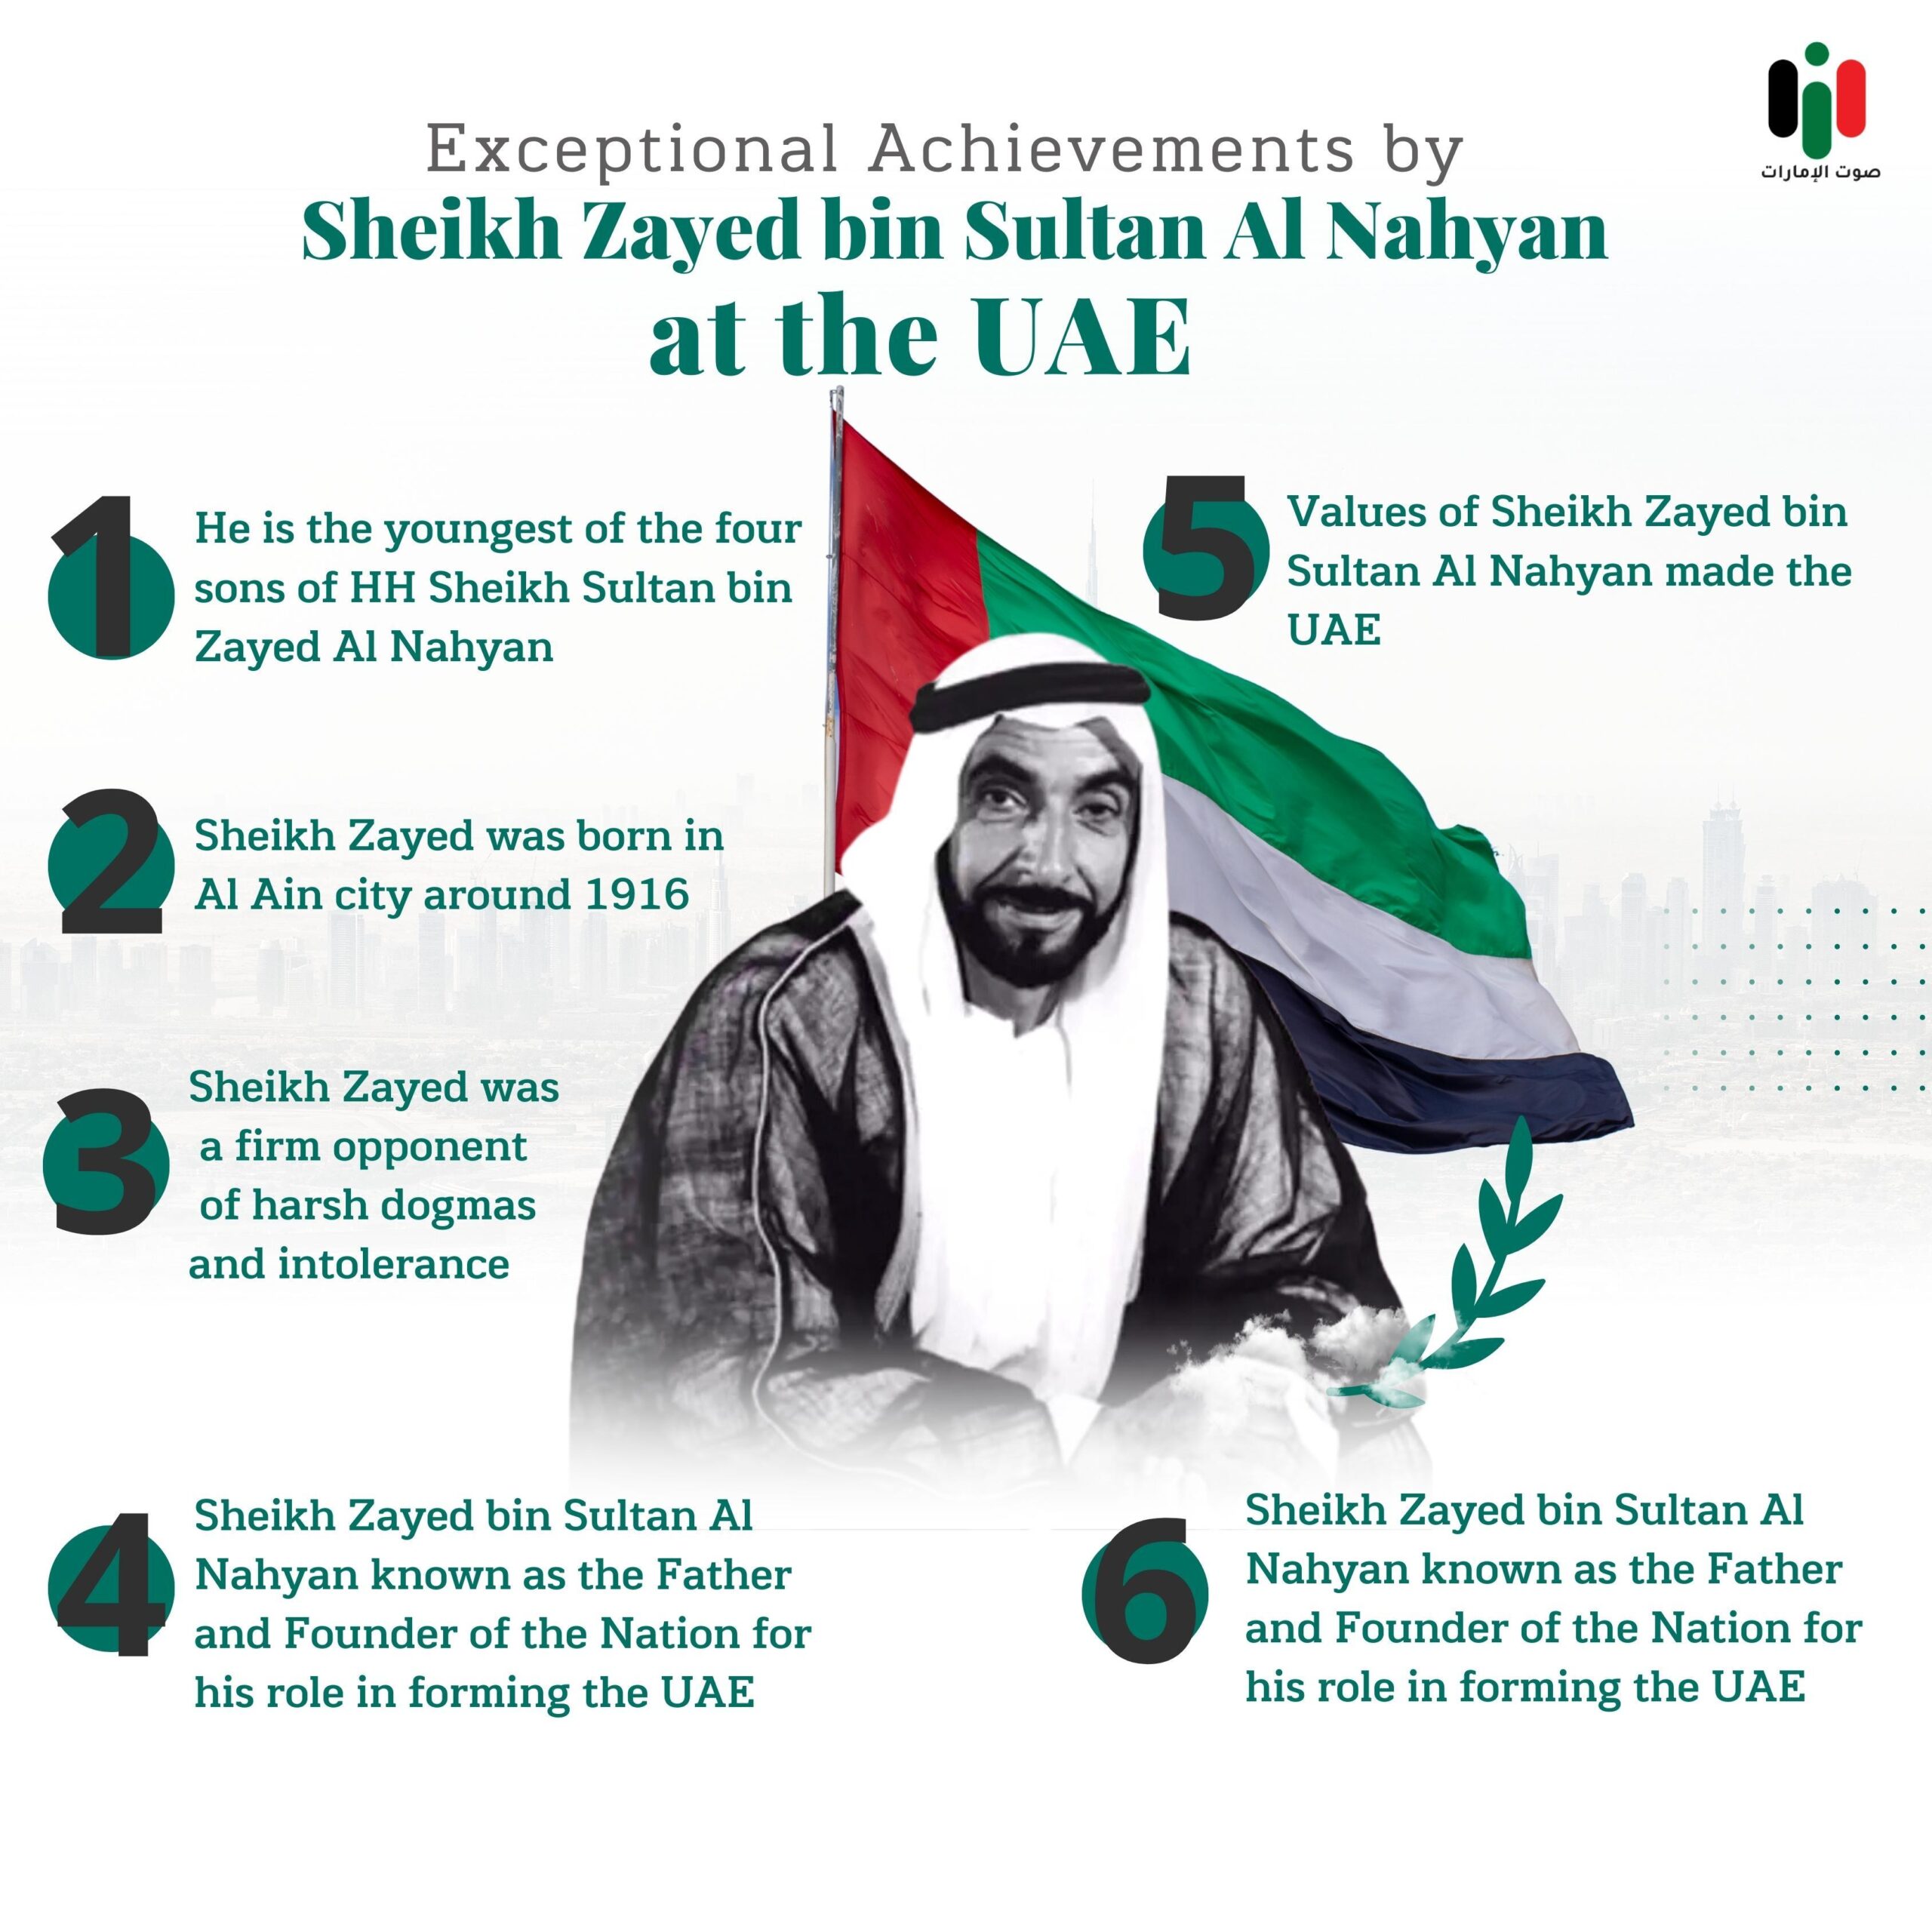 A show inspired by the legacy of the late Sheikh Zayed bin Sultan Al Nahyan